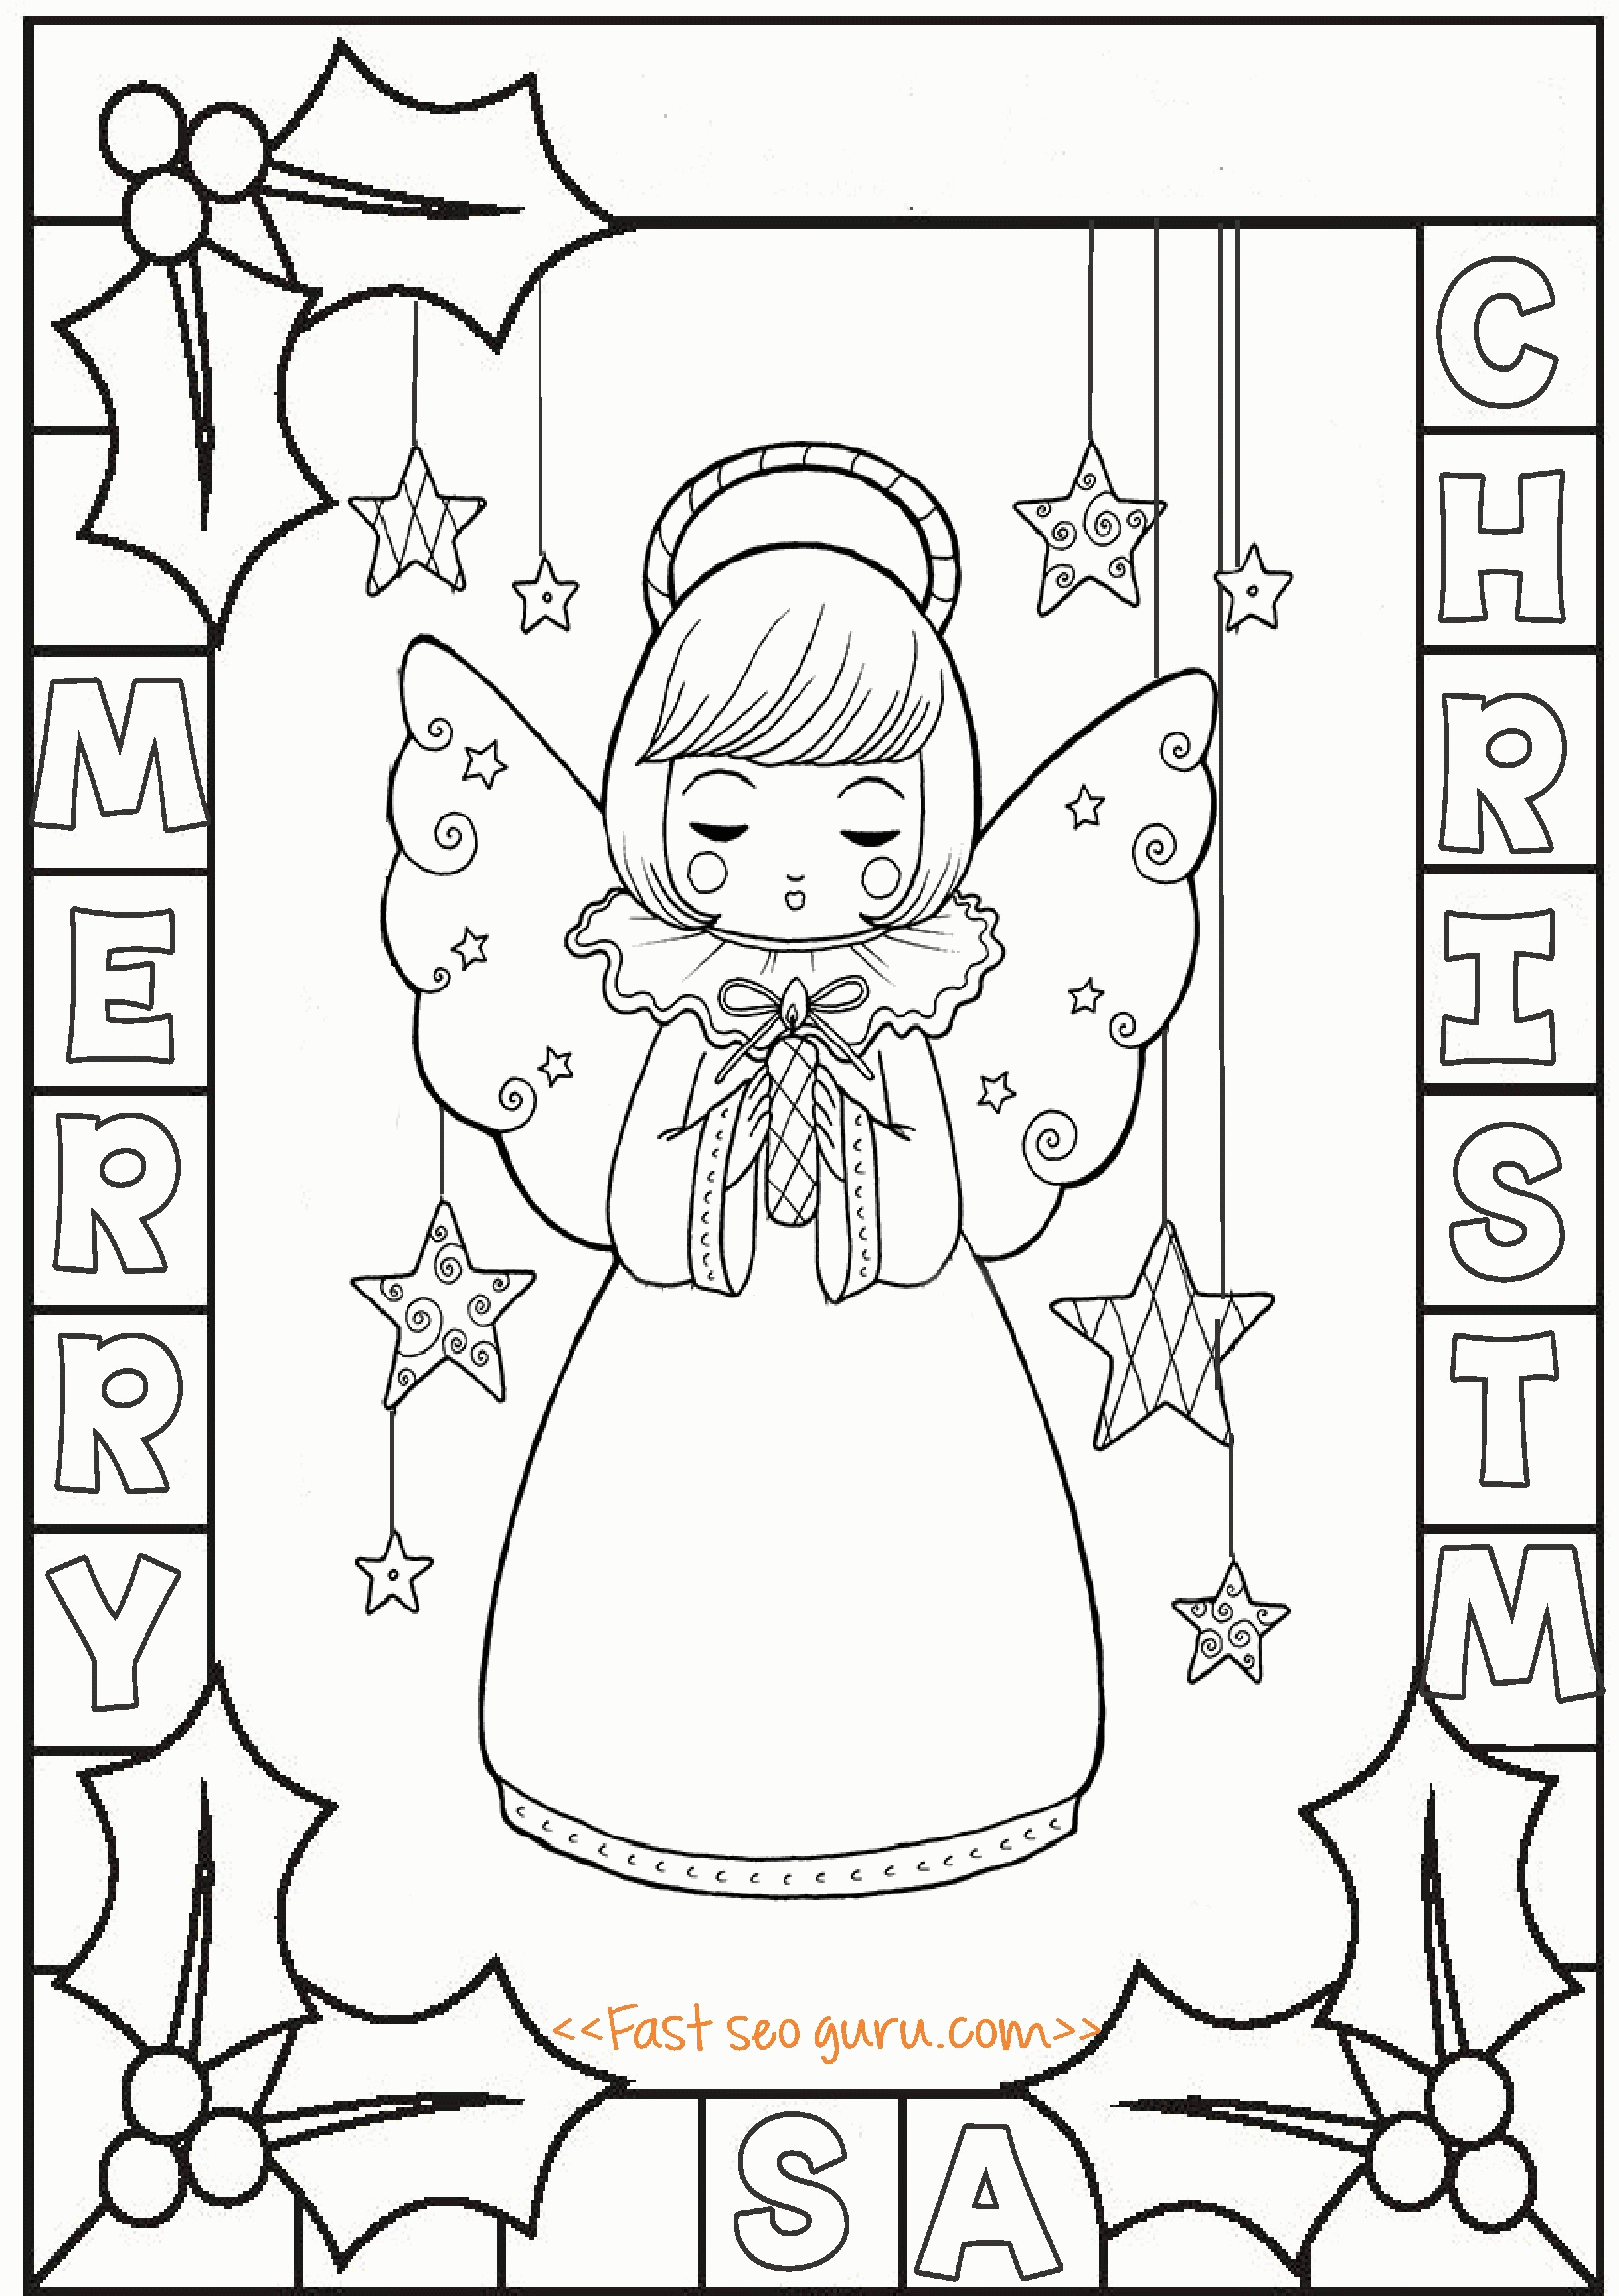 Printable Christmas Holly Coloring Pages - Coloring Home